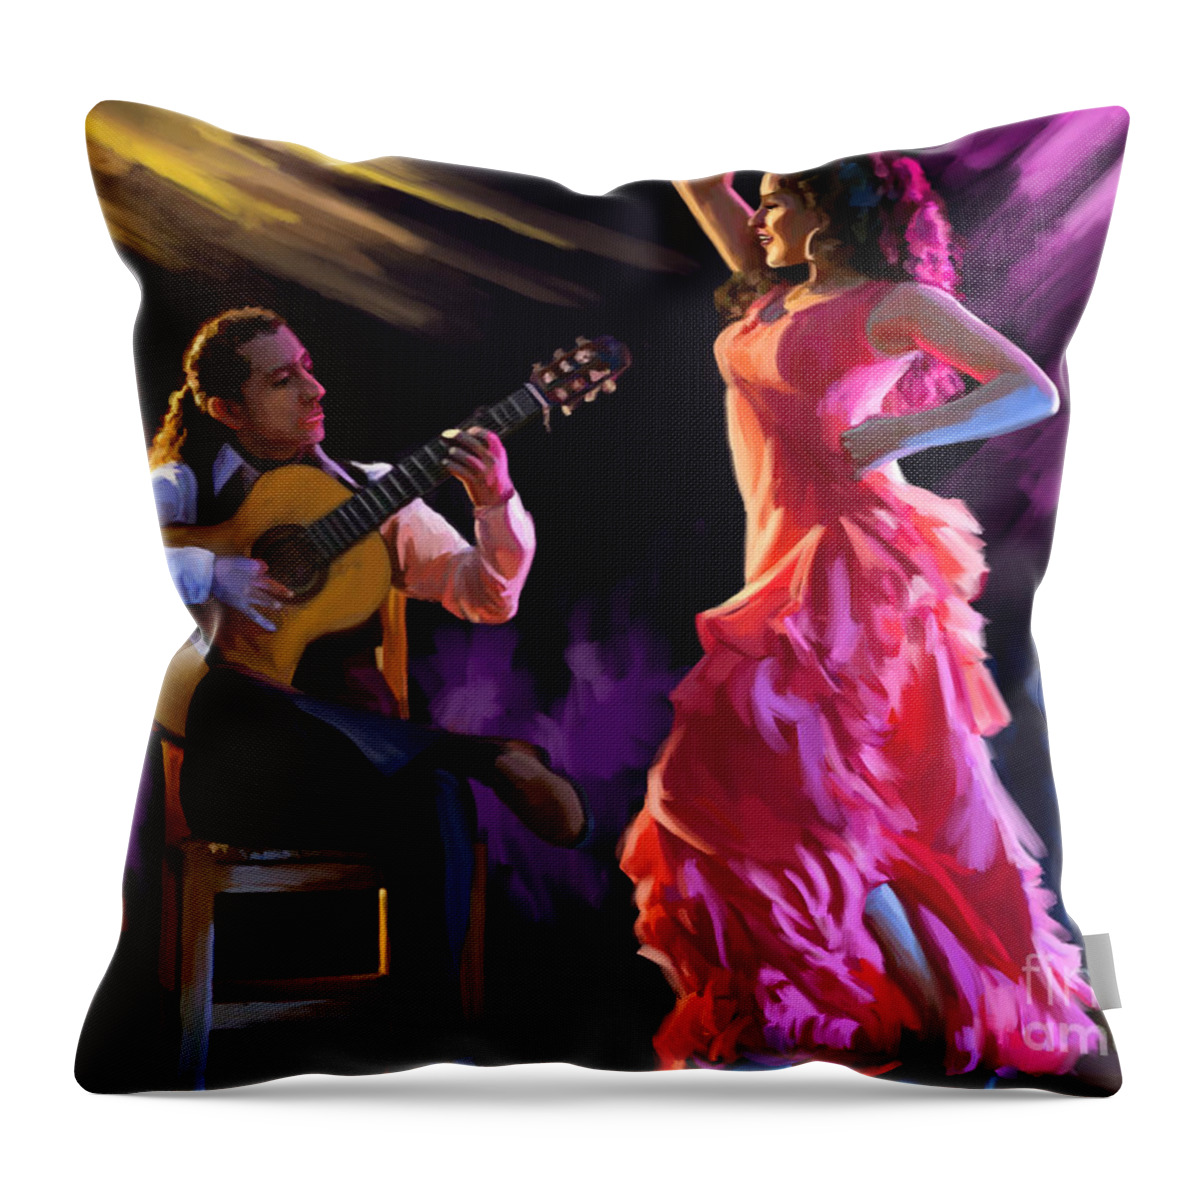 Dancing Gypsy Woman Throw Pillow featuring the painting Dancing Gypsy Woman by Tim Gilliland